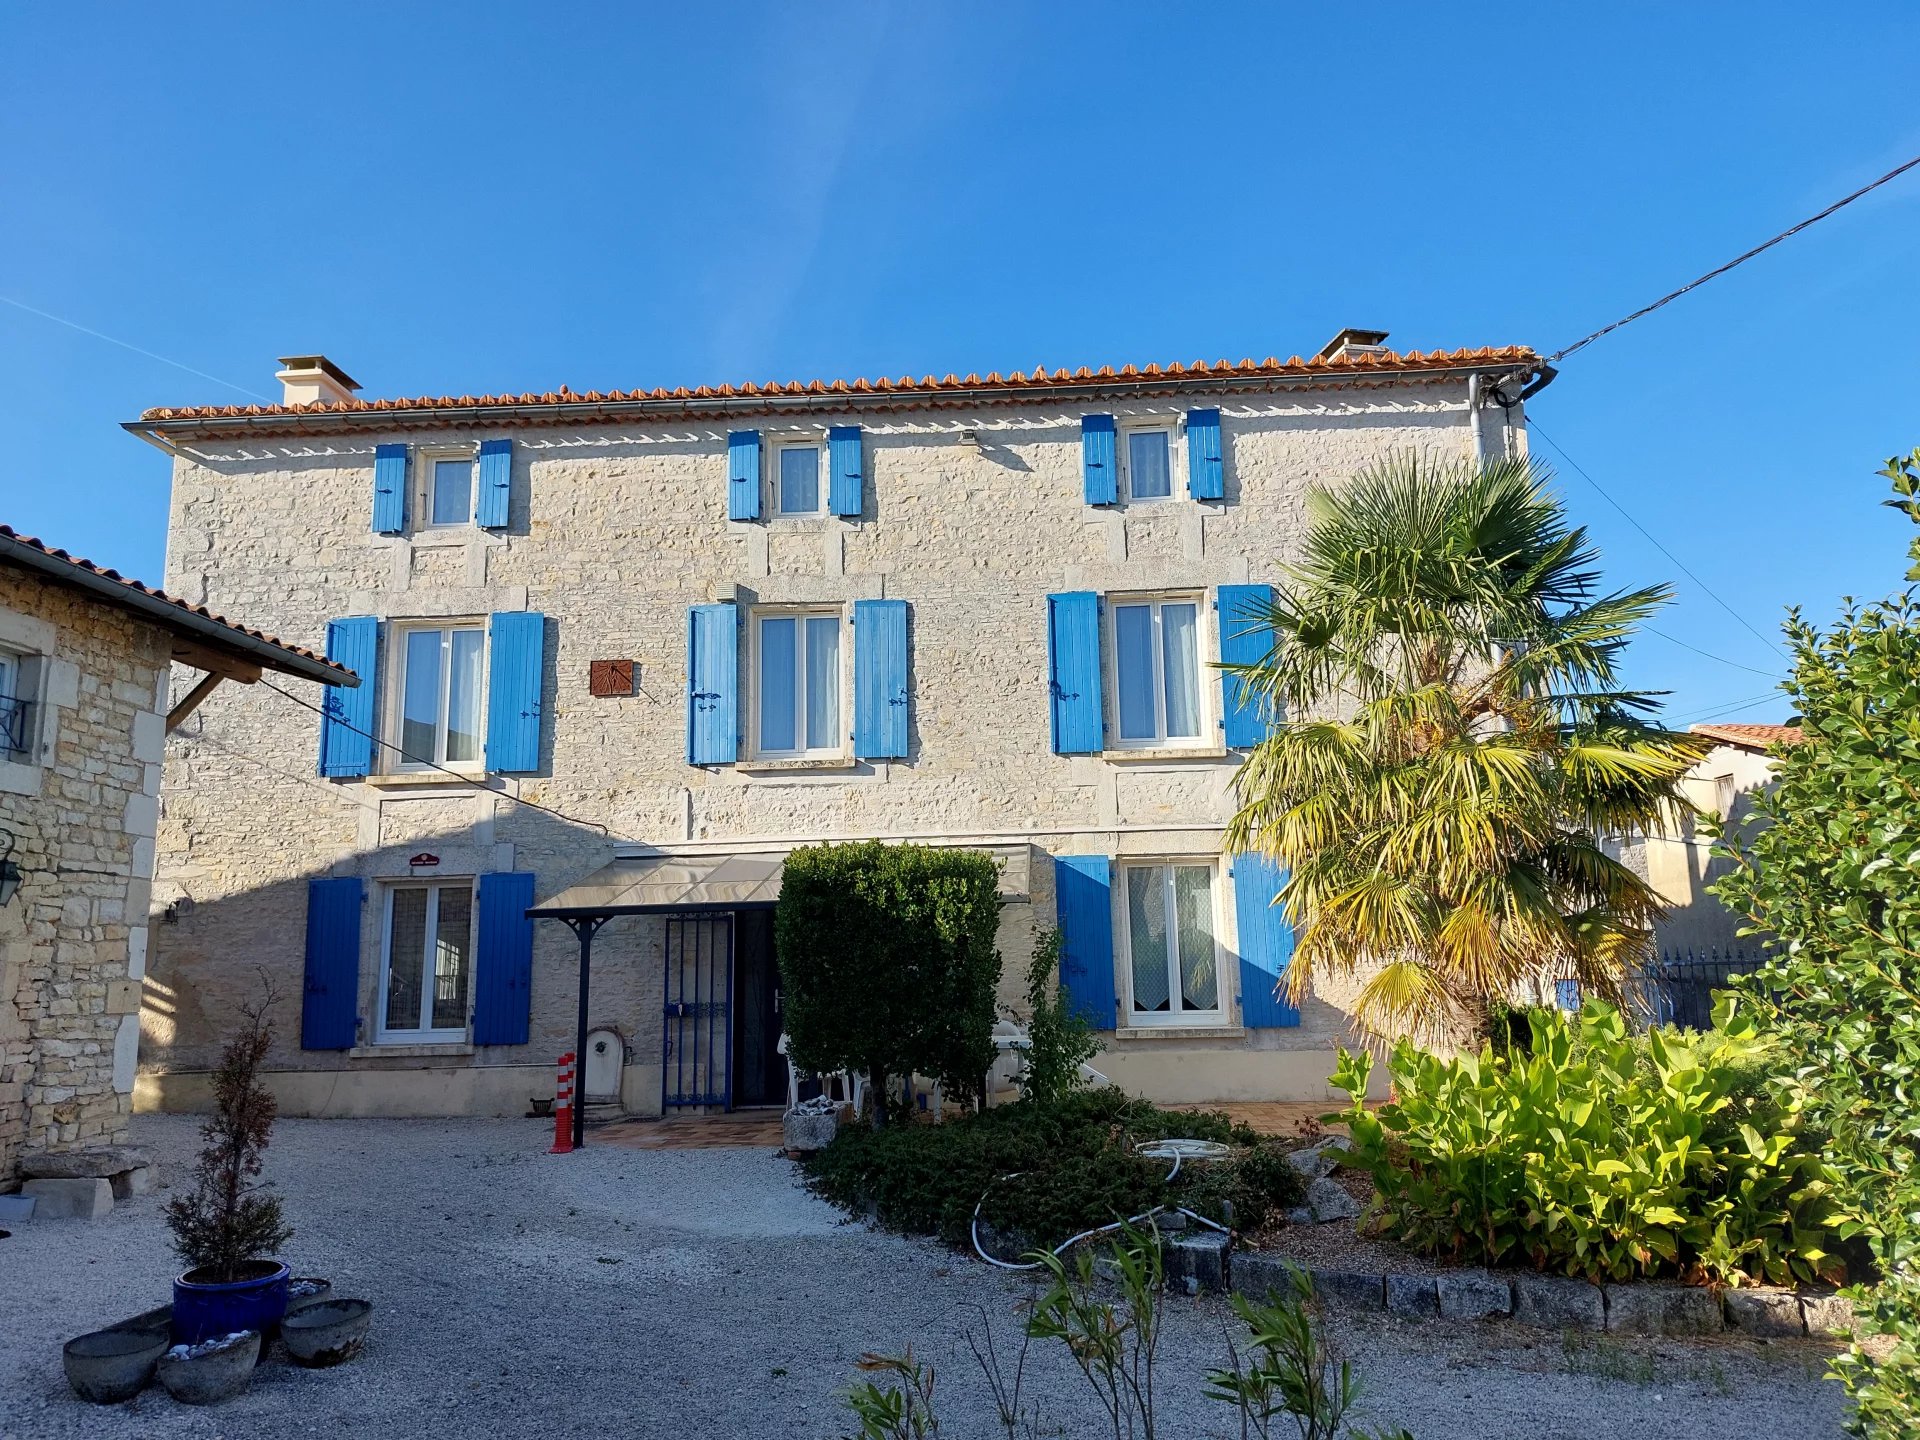 Beautiful 6-bed Maison de Maître with 3-bed gîte, swimming pool and 8481m² of land